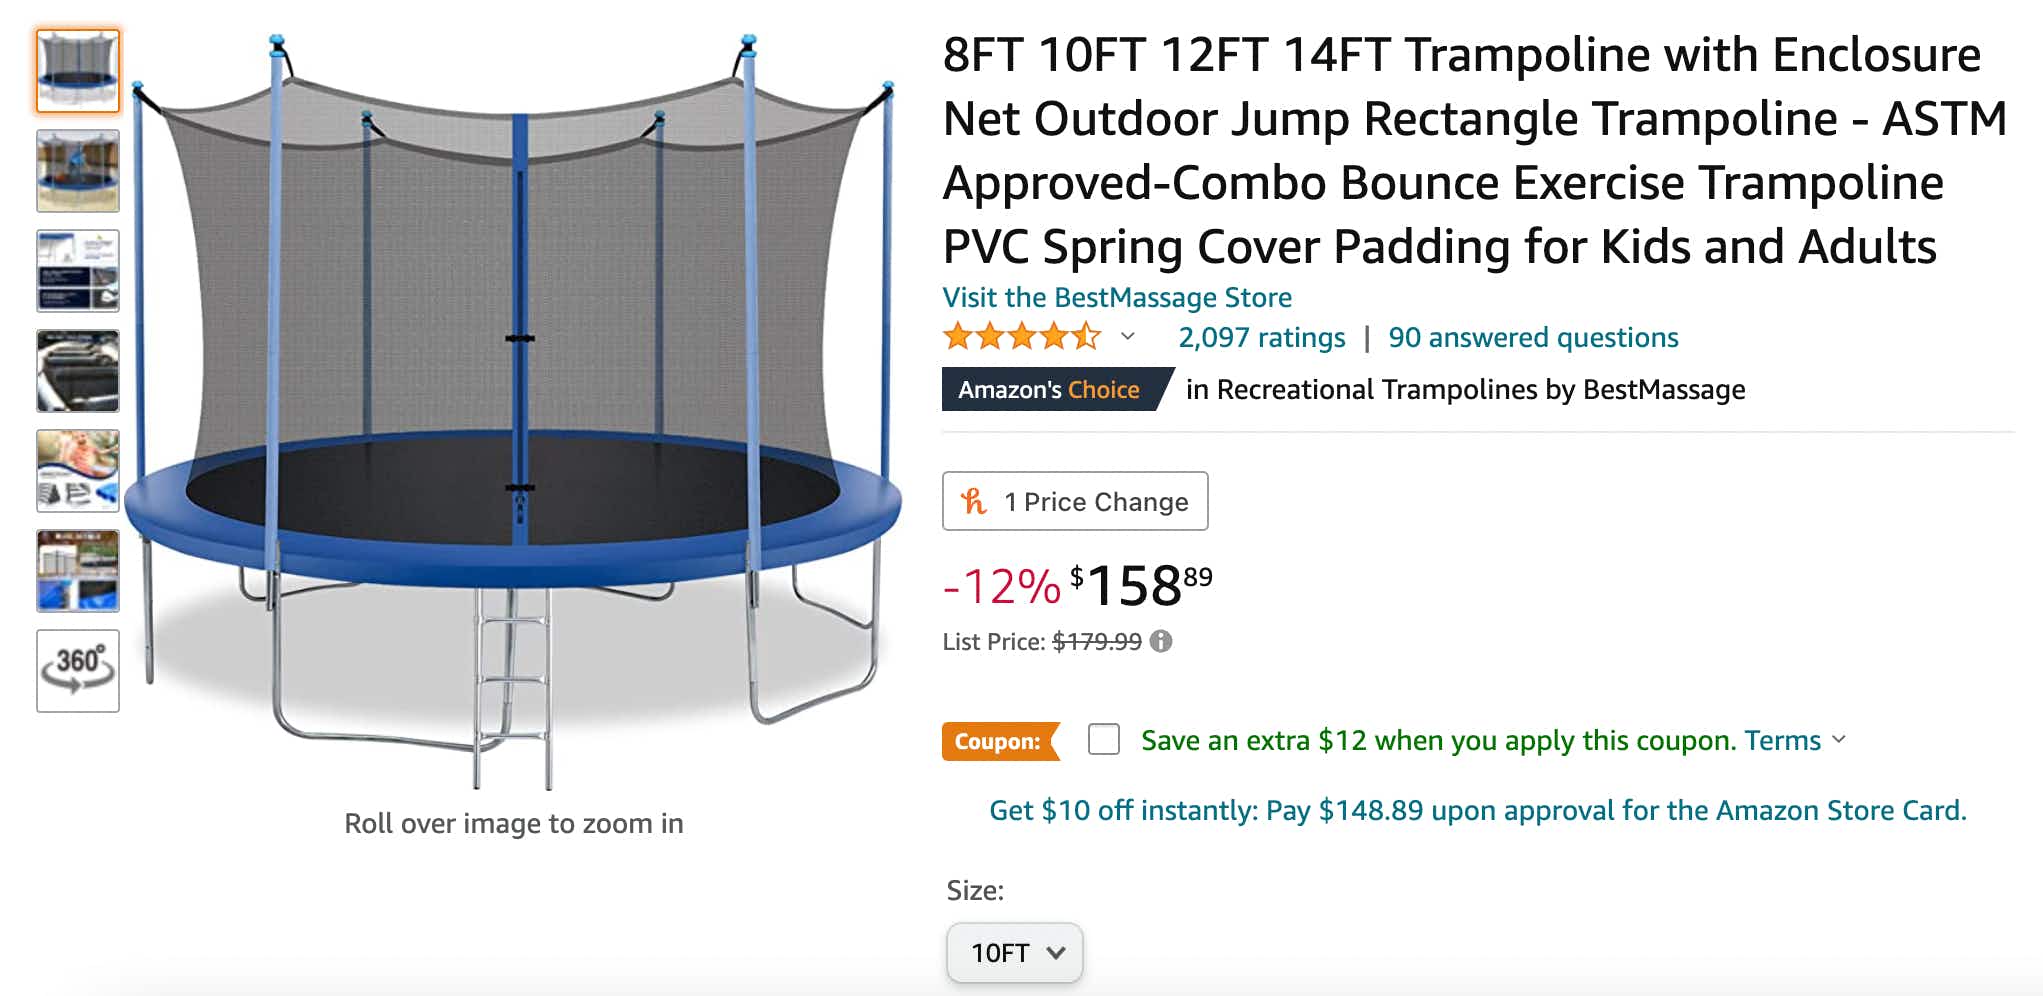 A screenshot of a trampoline product page on Amazon.